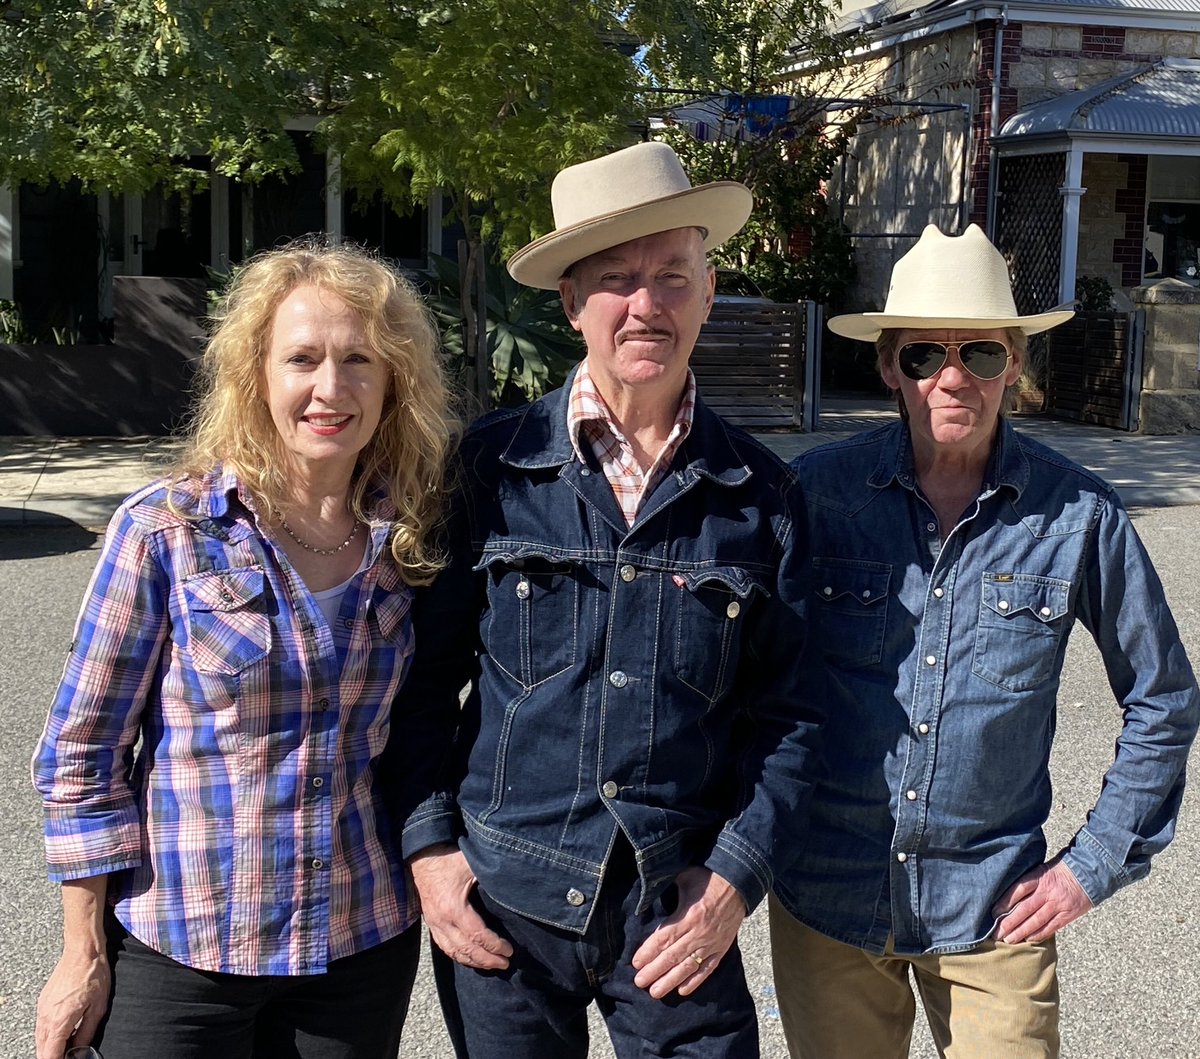 Had a great time playing in WA in Freo, Kalamunda and Maylands on the weekend. We were playing with Marty Casey on bass. A wide ranging set going back to the Moodists. Thanks to everybody who came along. Here we are dressed in aHeartland rock manner. #heartlandrock